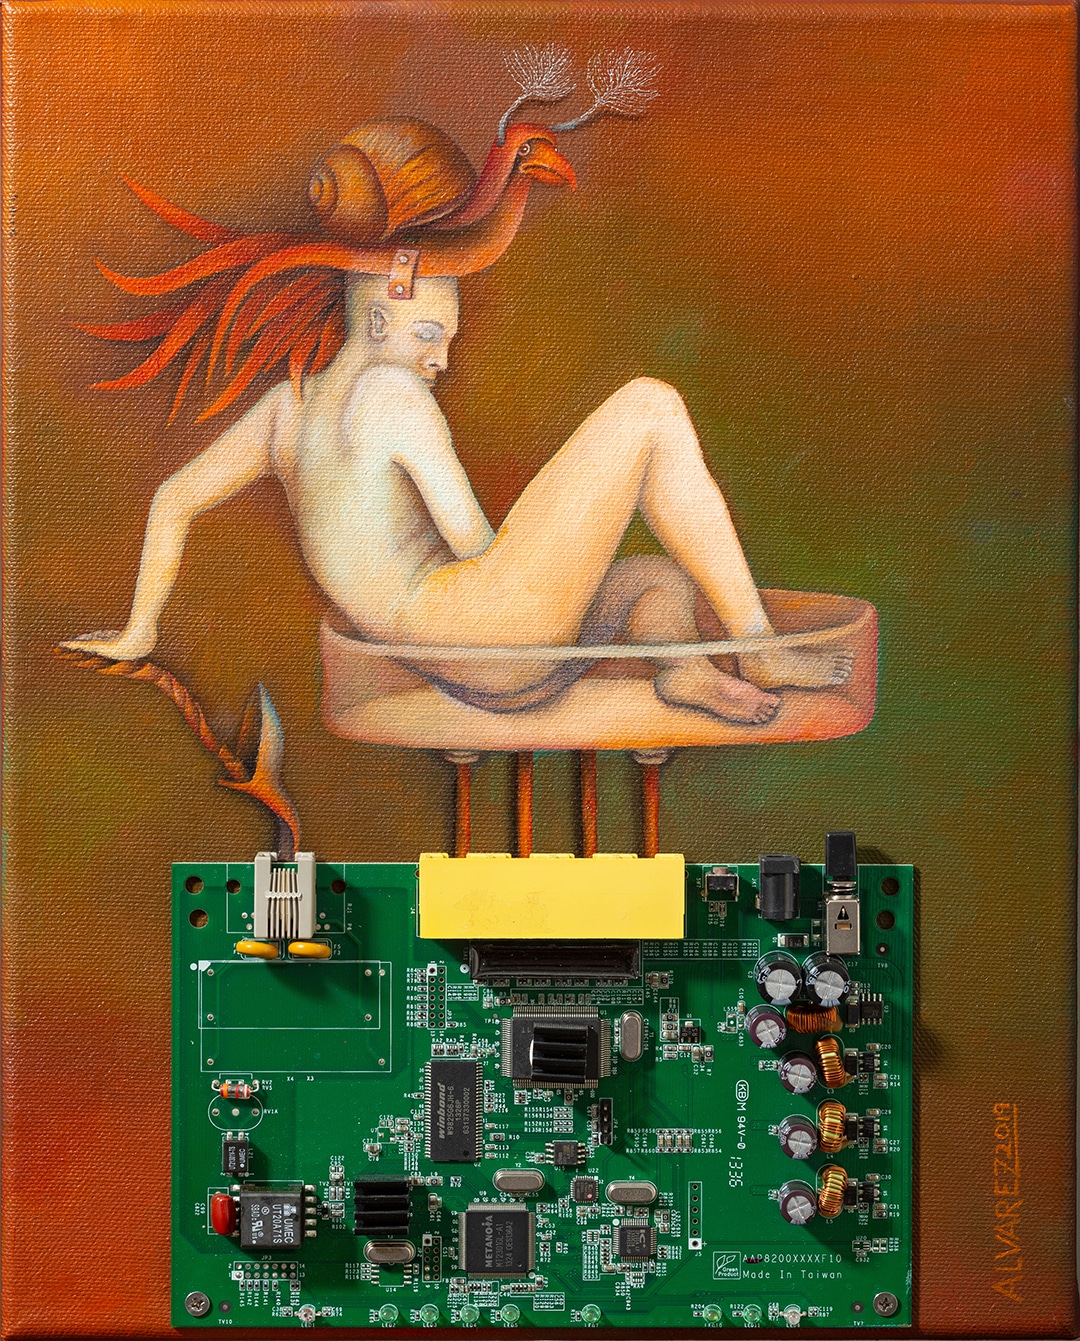 "It's All A Question Of Technology" Oil On Canvas + Objects by Katrin Alvarez